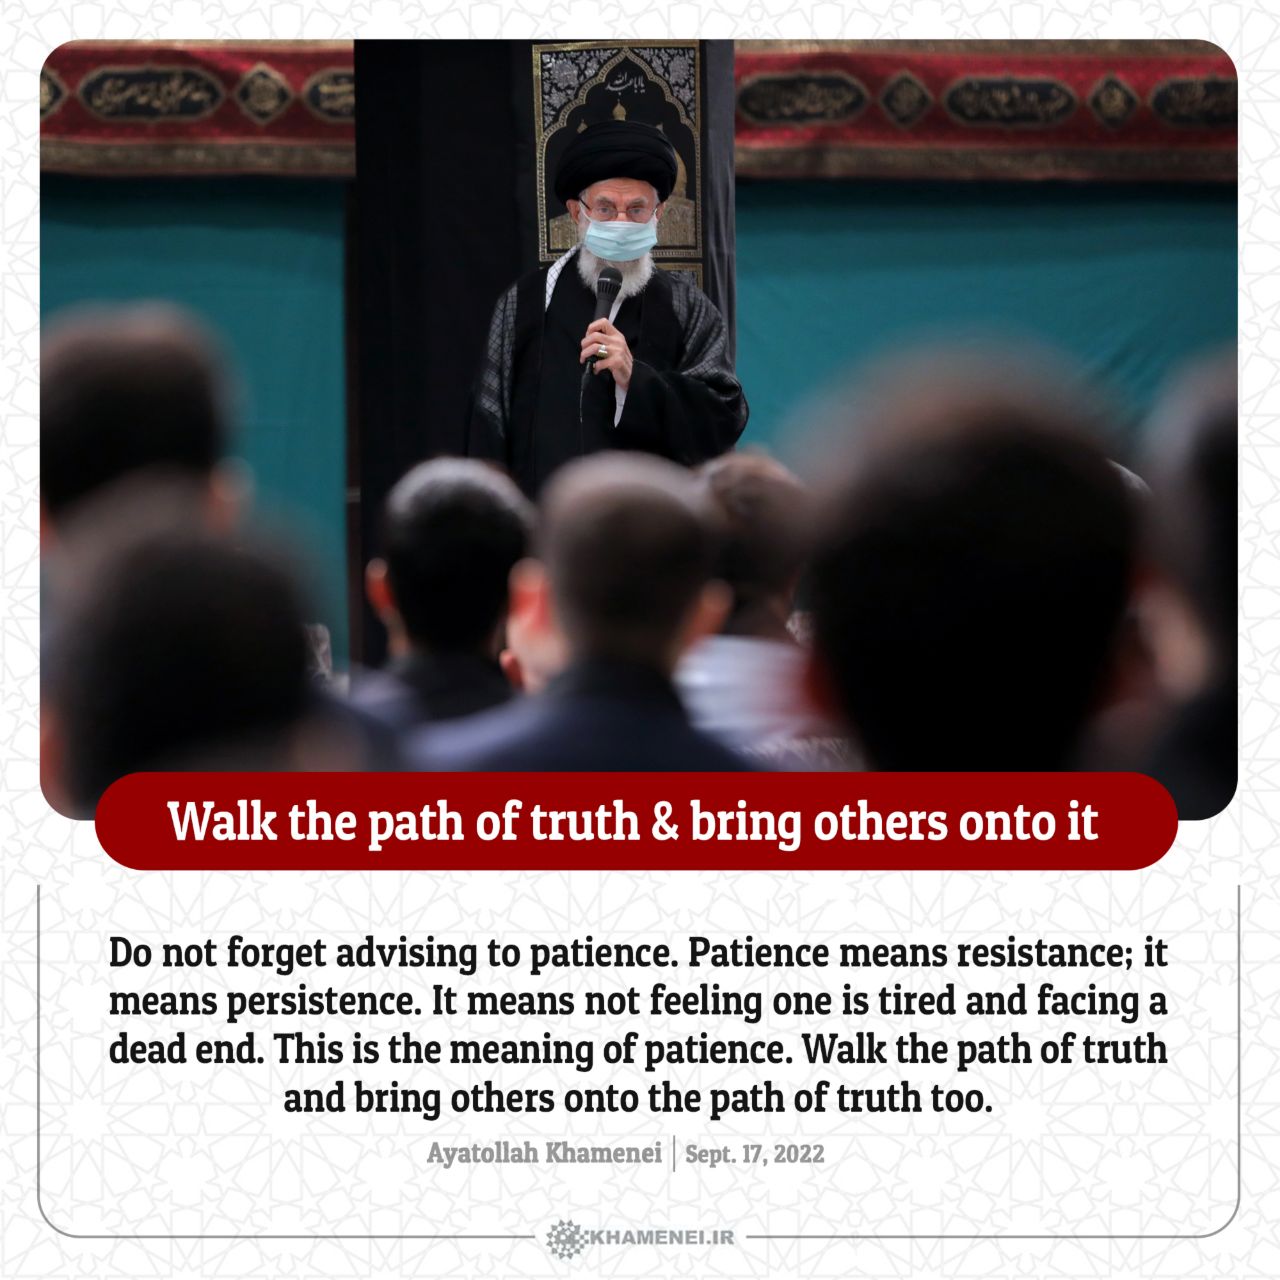 Walk the path of truth & bring others onto it